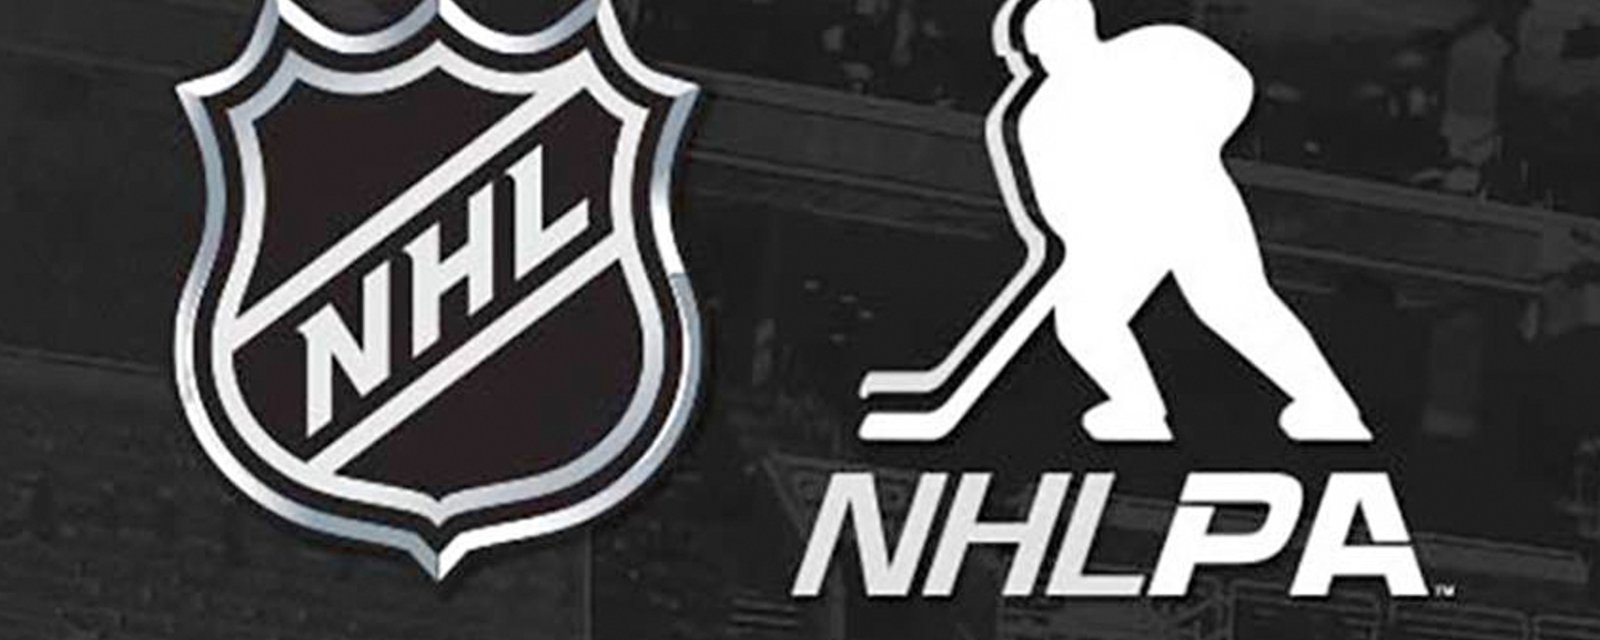 Full details of NHL's “Phase 2” including traveling, testing and opening of arenas